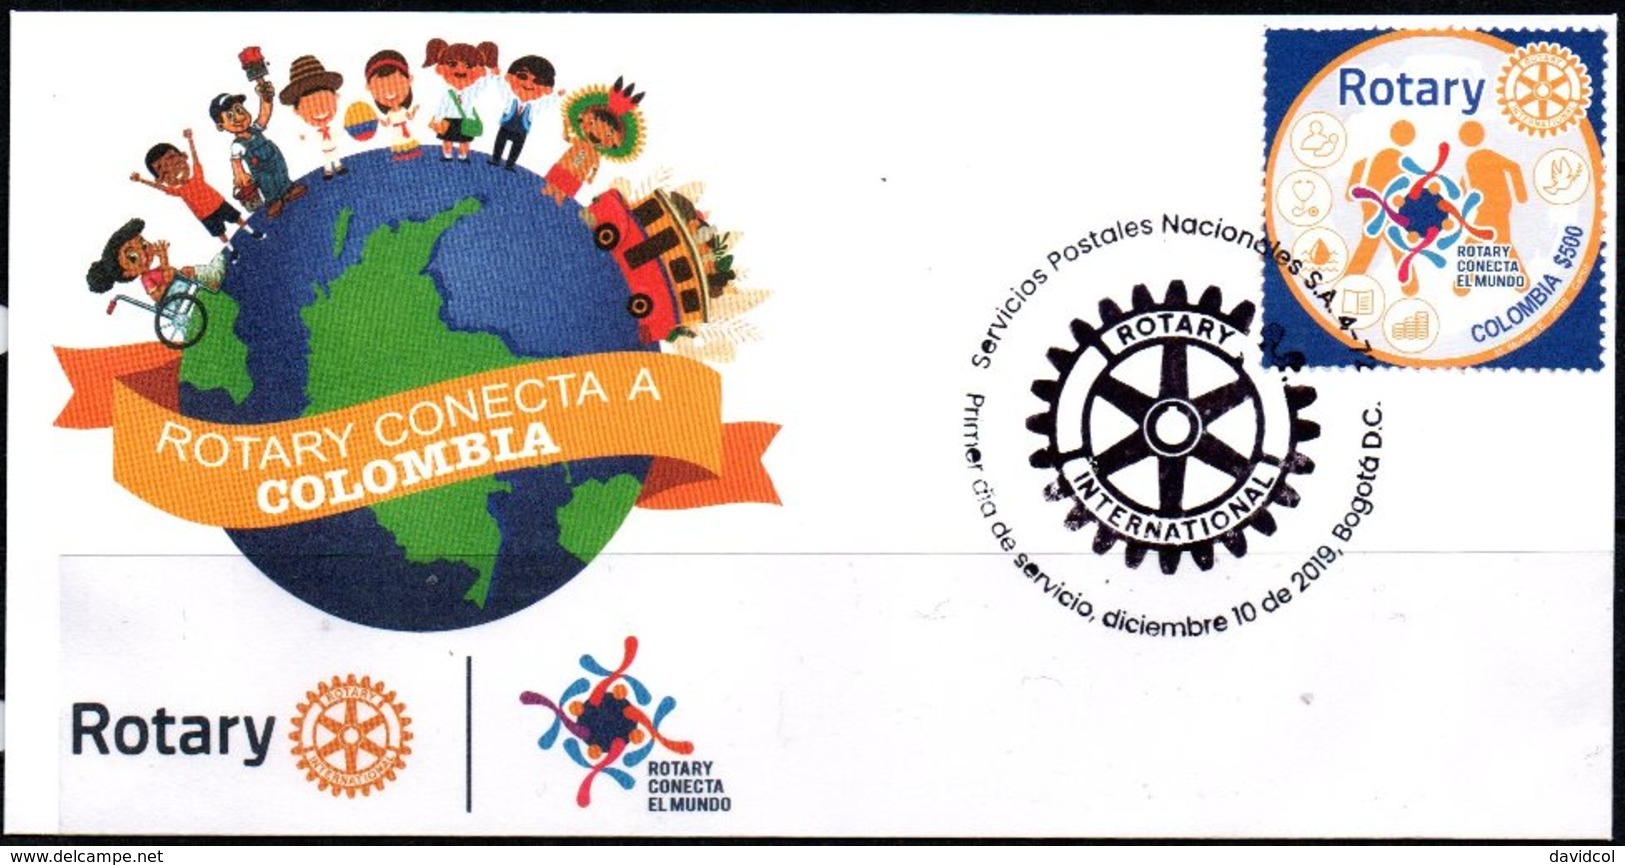 COLOMBIA- KOLUMBIEN- 2019  FDC/SPD. ROTARY INTERNATIONAL,ROTARY CONNECT COLOMBIA - Colombia